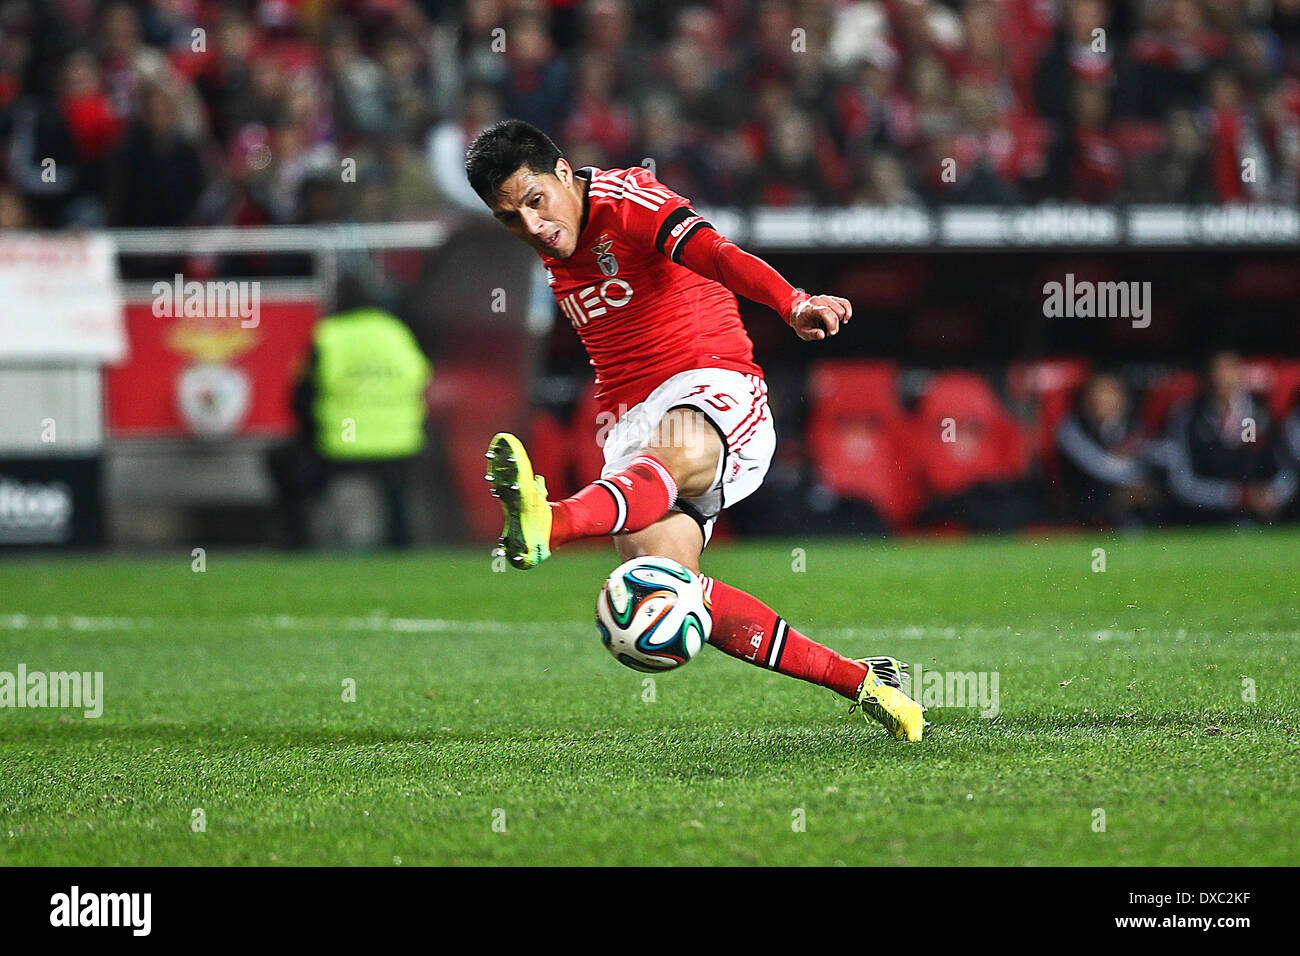 Lisbon, Portugal. 23rd Mar, 2014. Benfica's Argentine midfielder Enzo Perez scoring the third goal for Benfica during a soccer match between SL Benfica and Academica in the Portuguese Premier League, at Benfica's Luz Stadium in Lisbon, on March 23, 2014. © Action Plus Sports/Alamy Live News Stock Photo